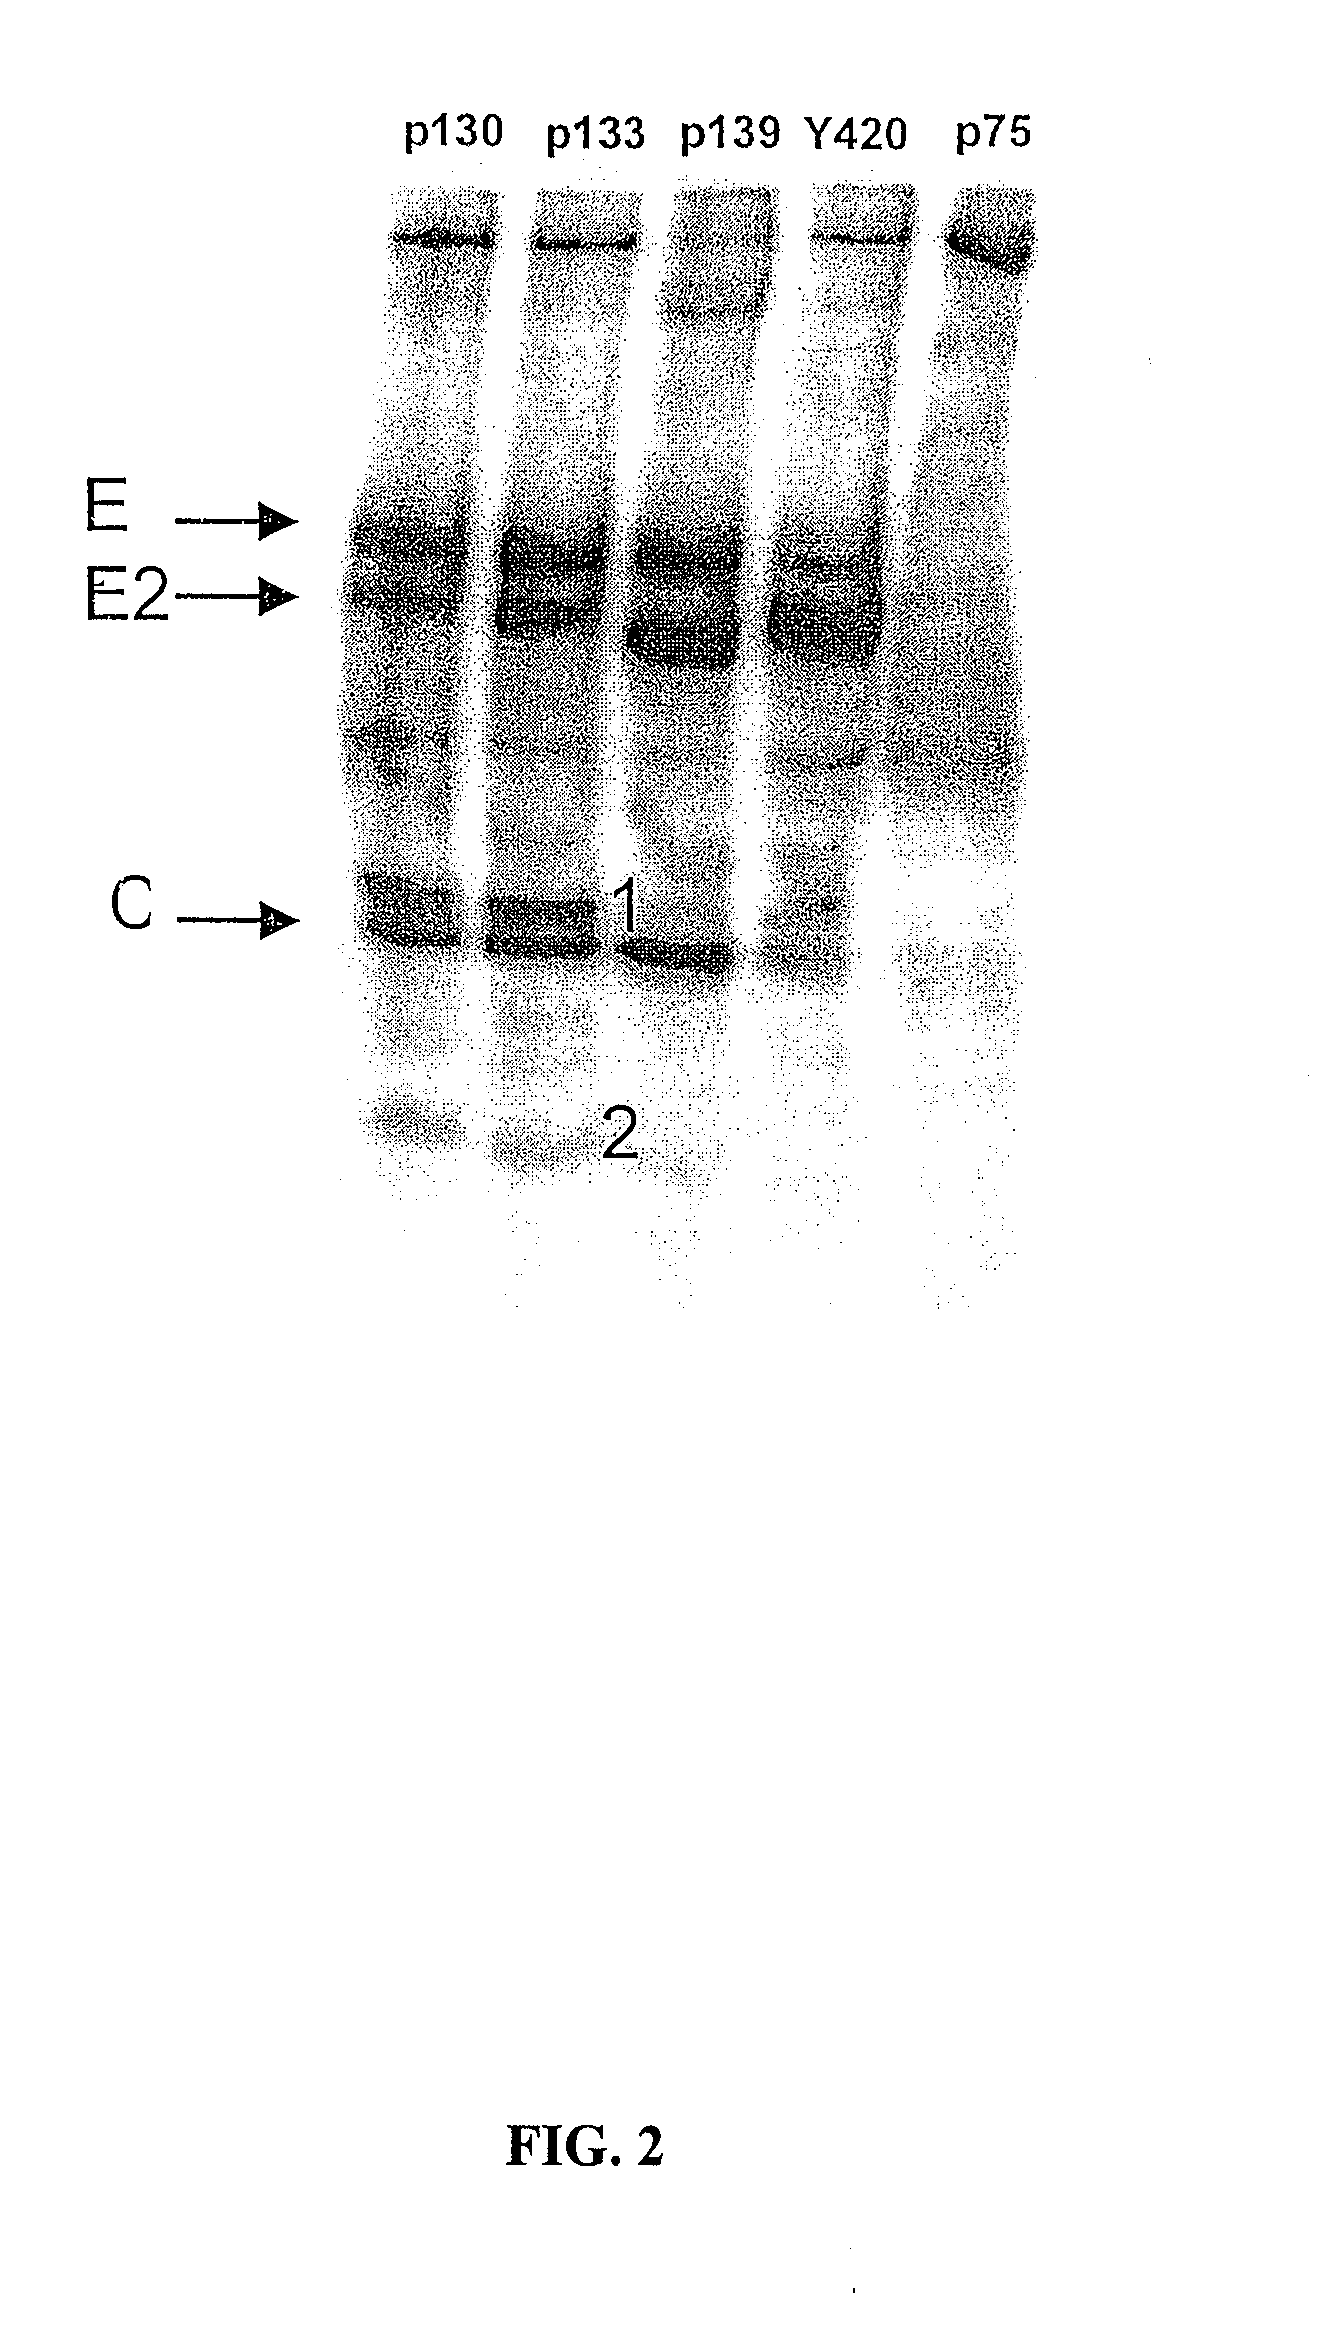 Insertion of furin protease cleavage sites in membrane proteins and uses thereof